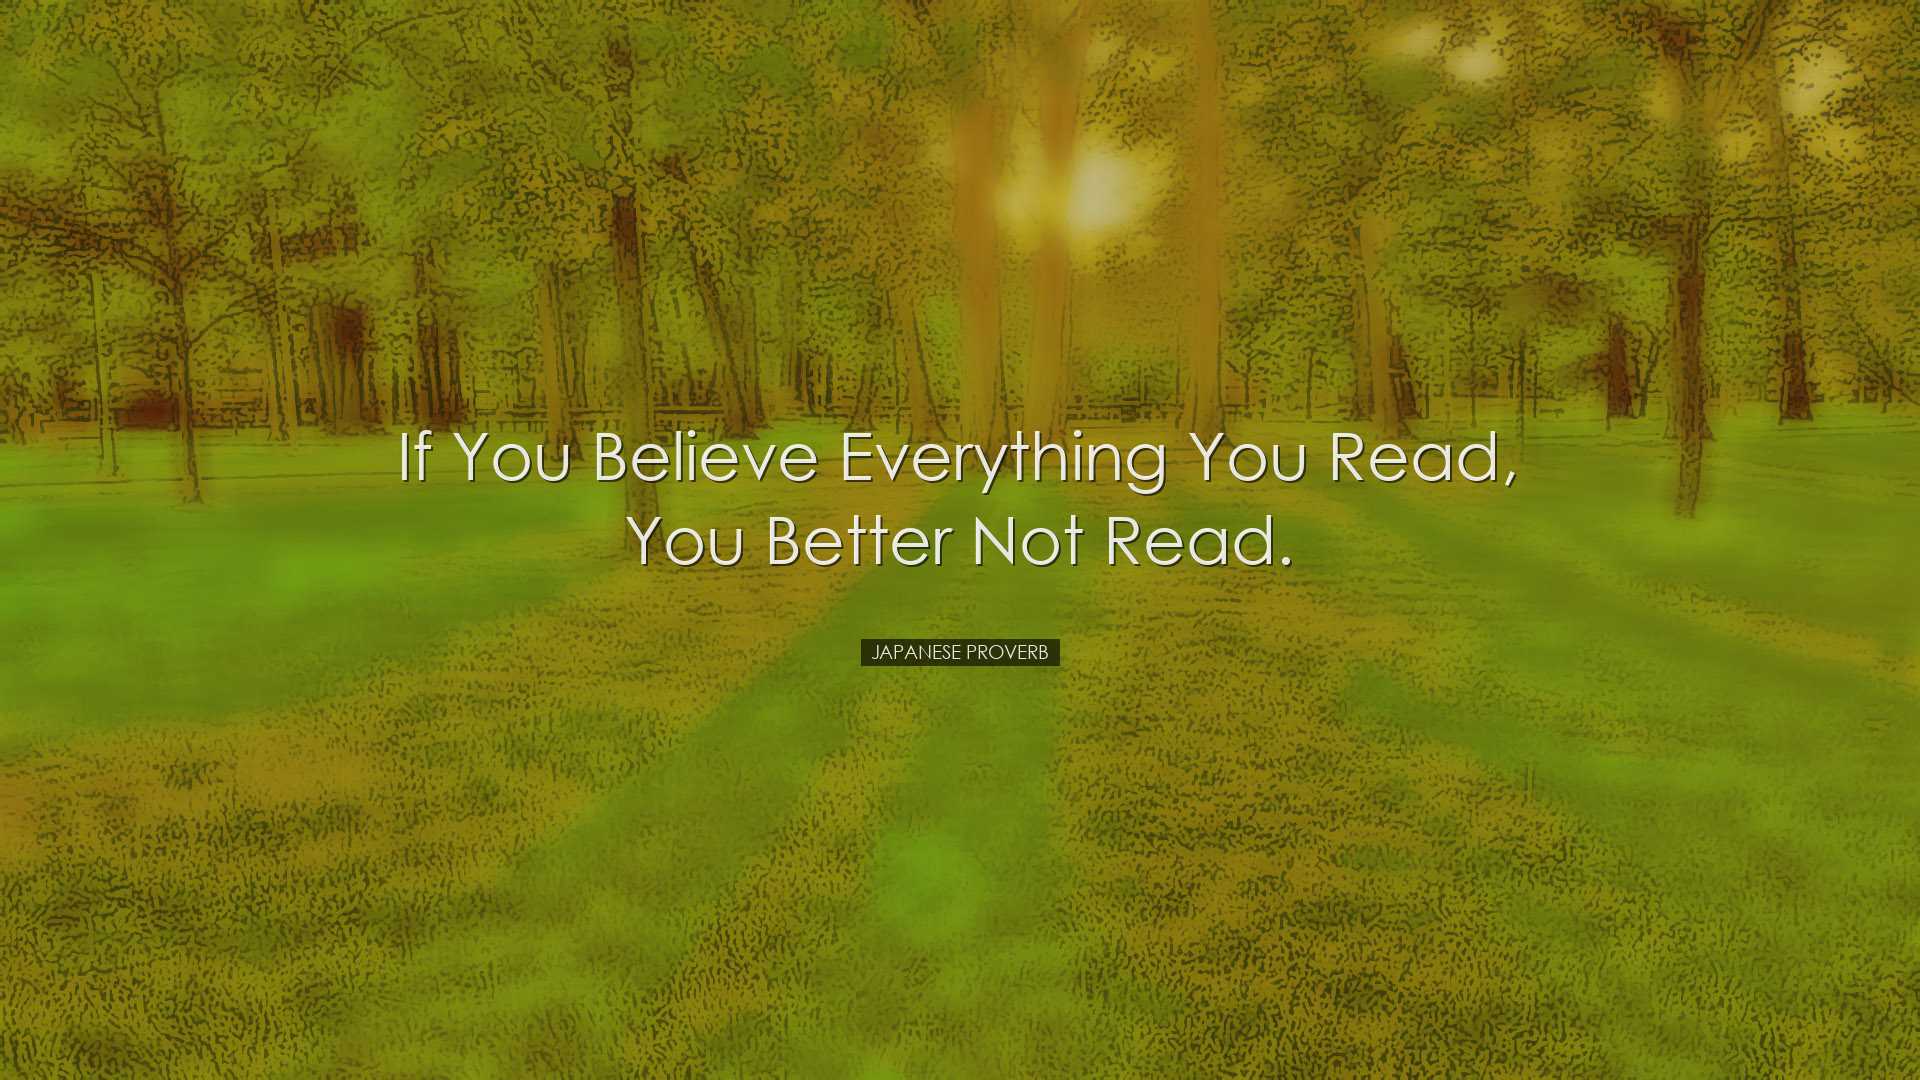 If you believe everything you read, you better not read. - Japanes